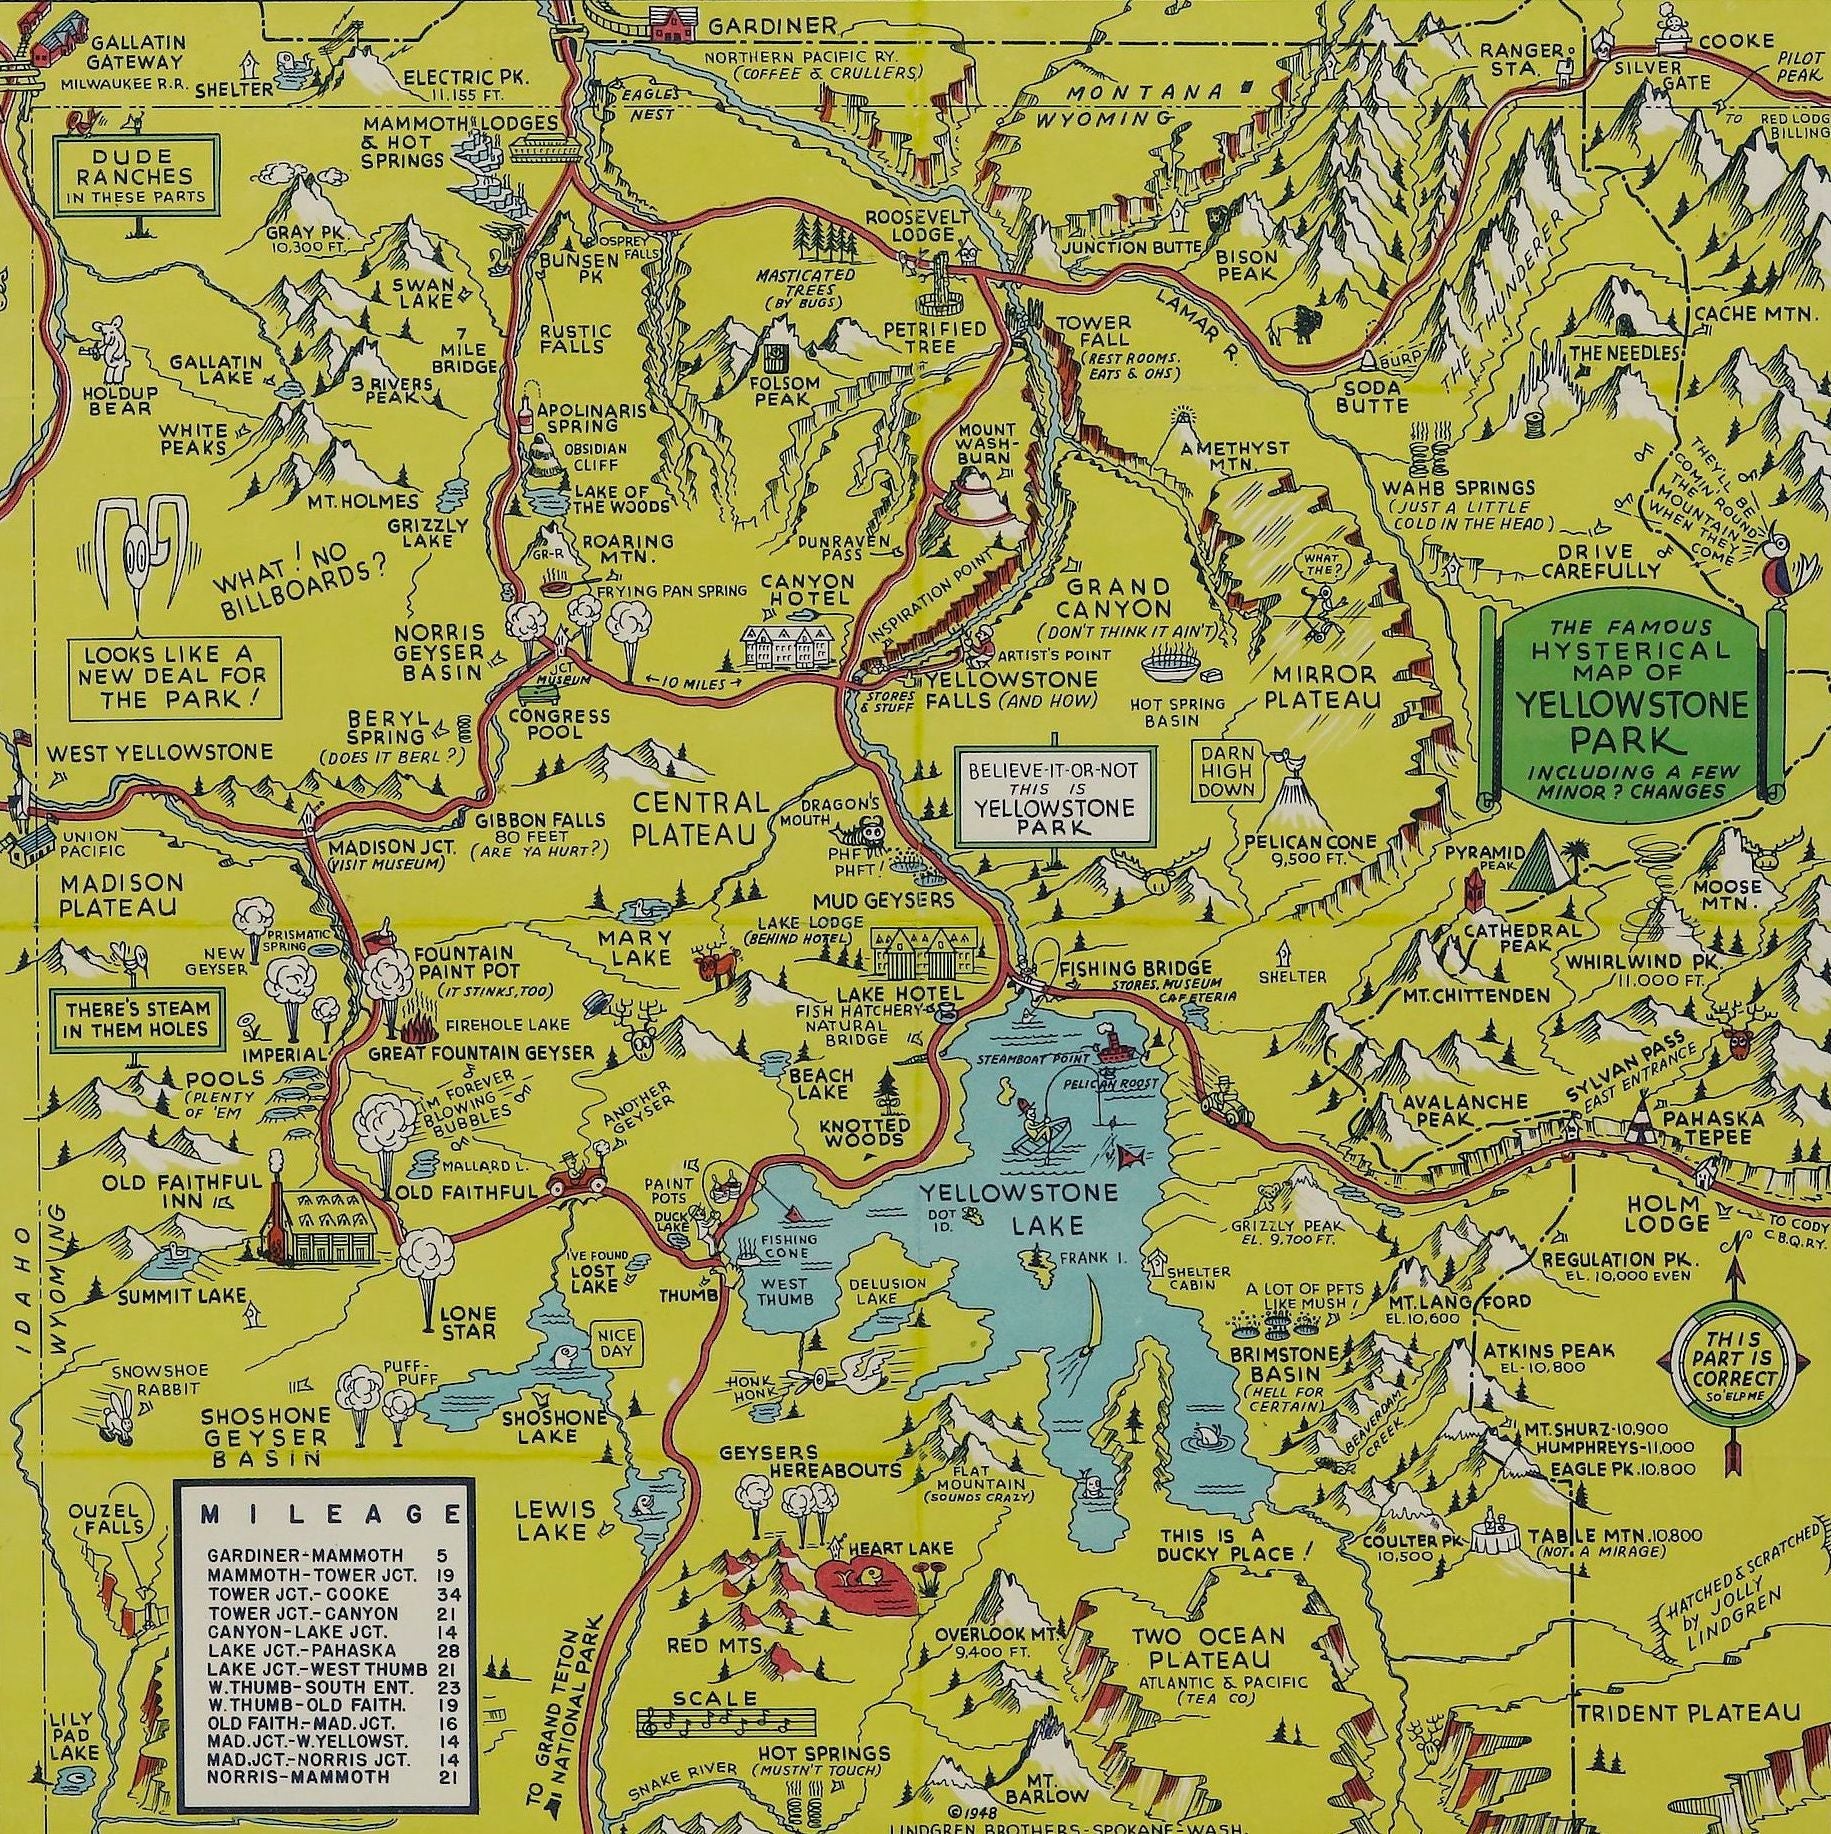 1948 "A Hysterical Map of Yellowstone National Park" by Jolly Lindgren, Second Edition Printing - The Great Republic